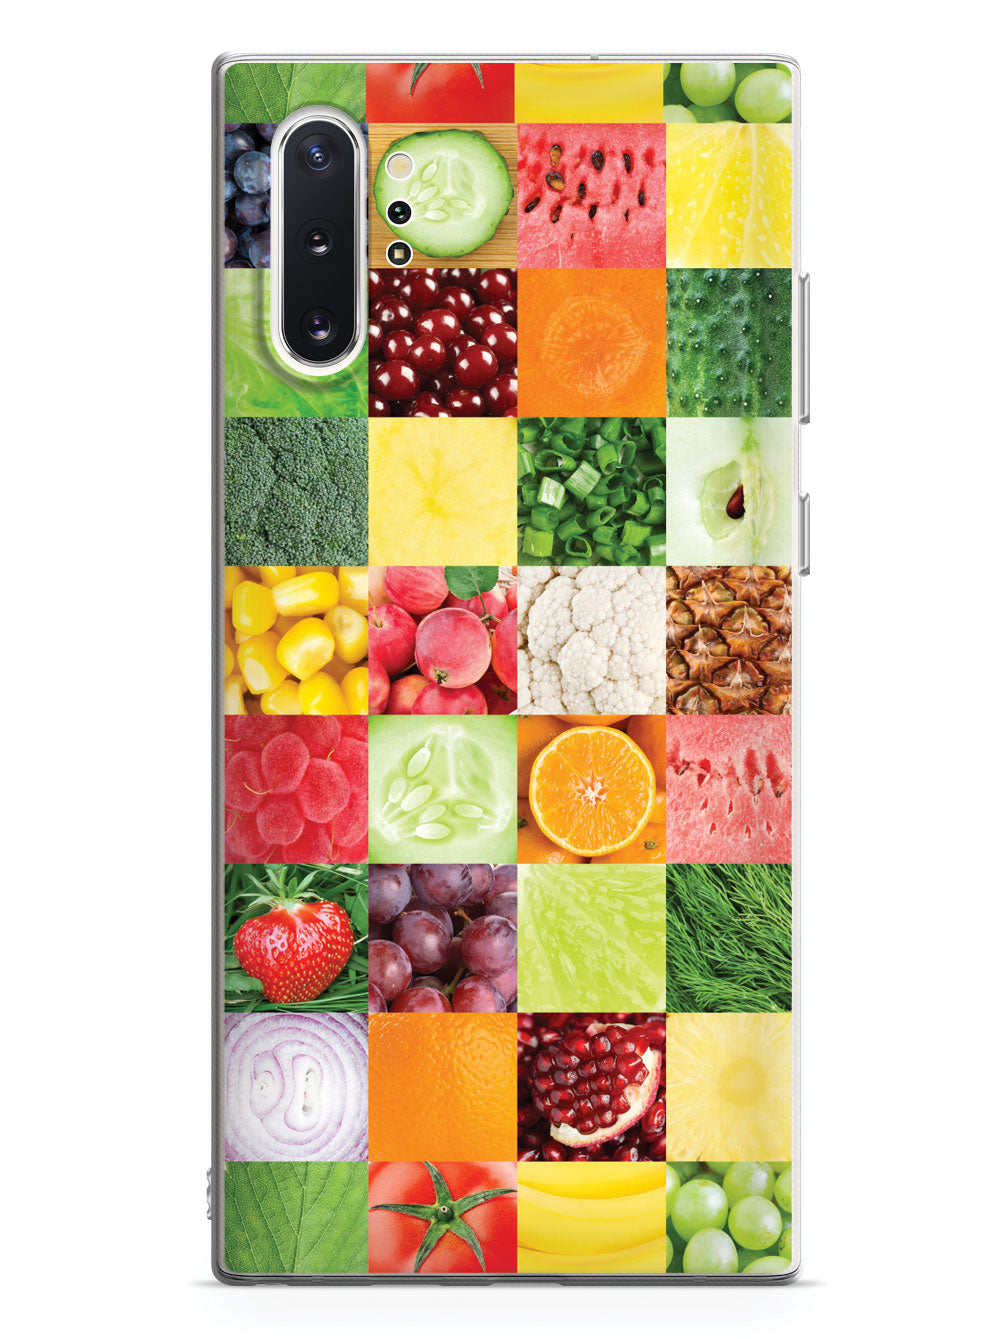 Healthy Foods Quilt Pattern 1 Case